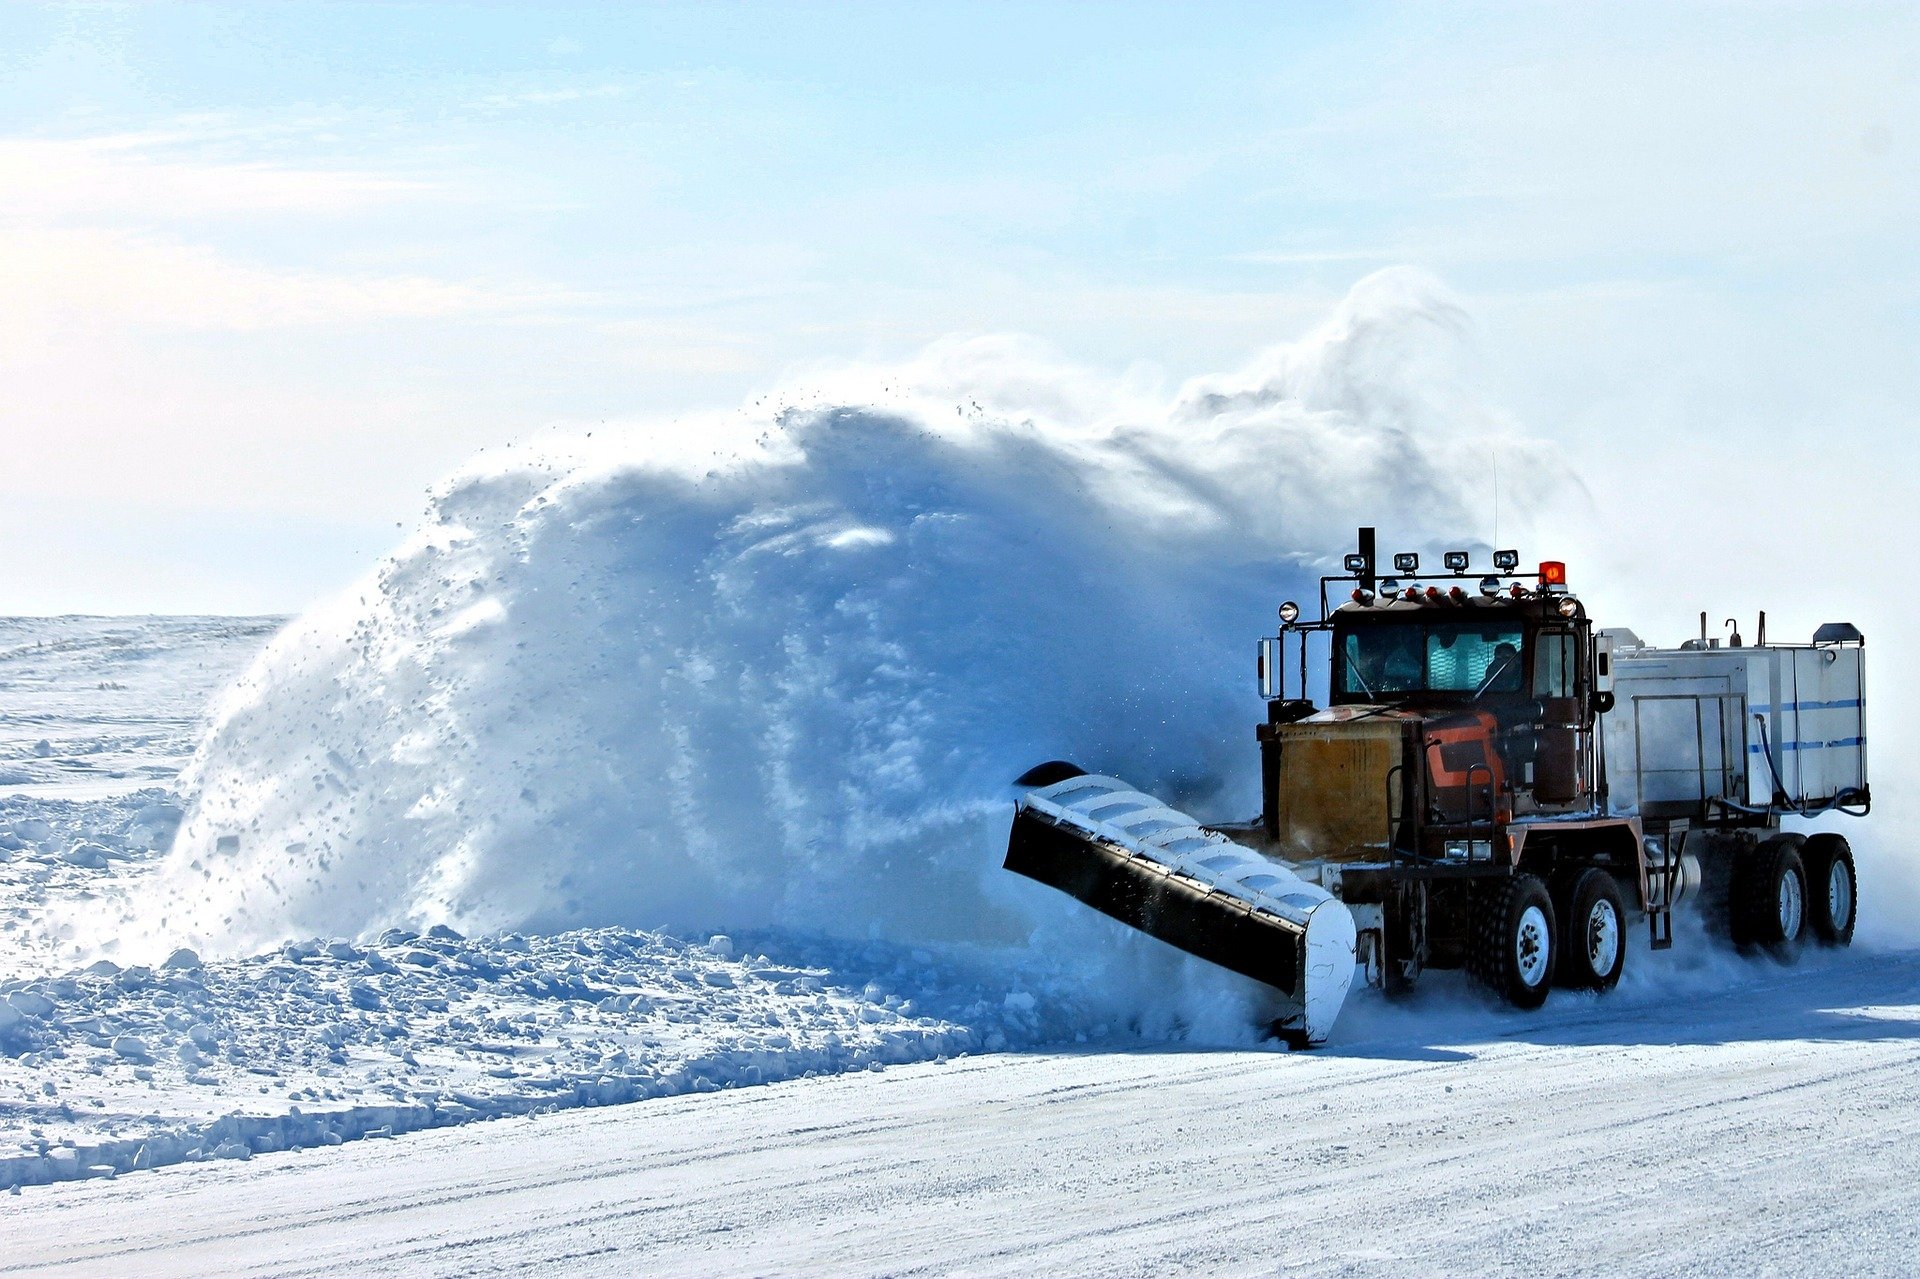 cool picture of a snow plow in action